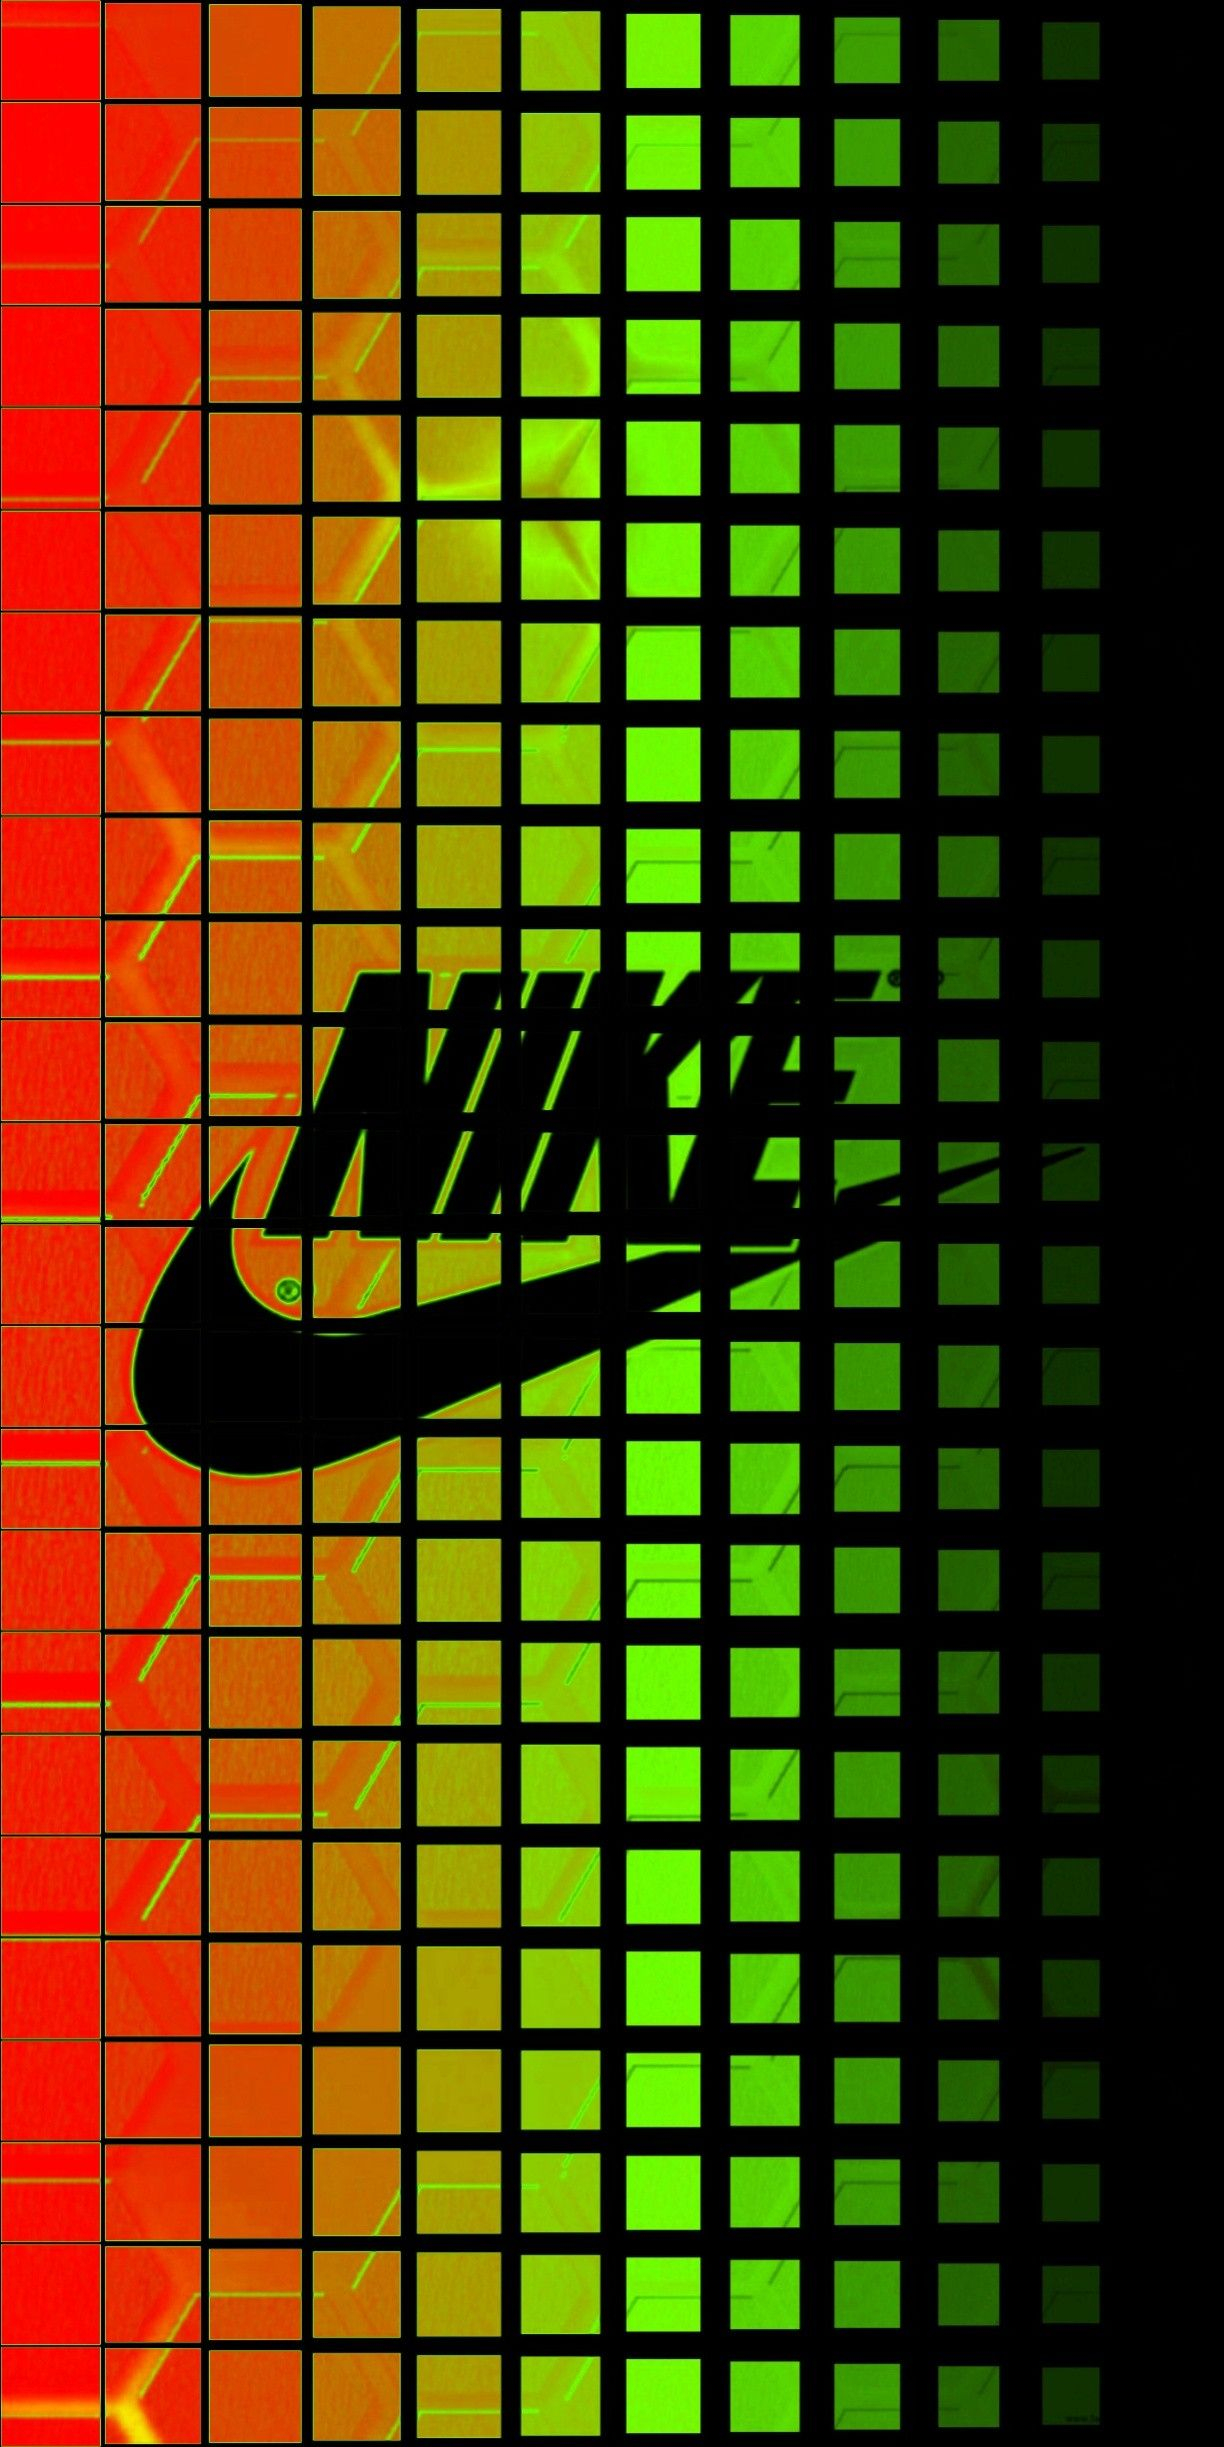 1224x2447 Pin by Hooter's Konceptz on Nike wallpaper | Nike wallpaper, Nike logo wallpapers, Adidas wallpapers